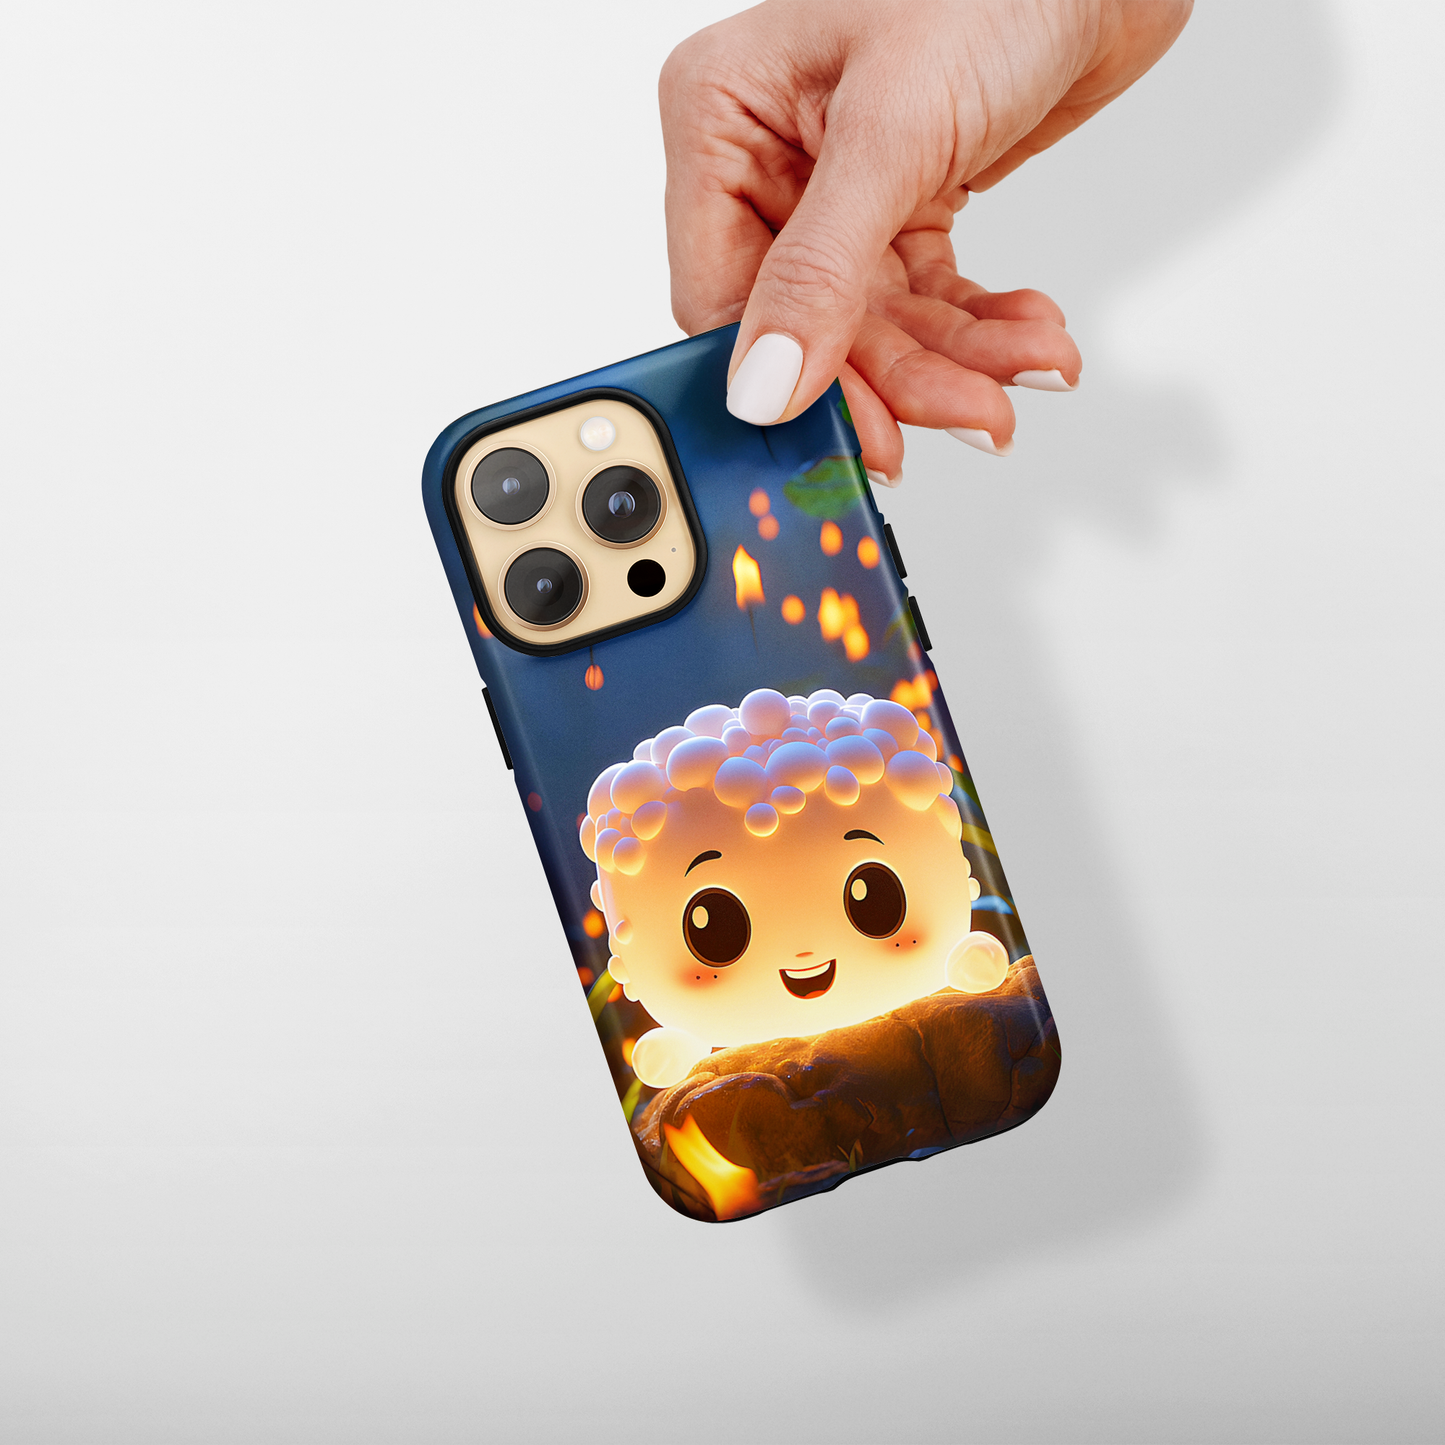 Gleeful Mallow (iPhone Case 11-15)
Gleeful Mallow
Get the ultimate protection for iPhone 11, 12, 13,14, 15 with RIMA's Tough Phone Case. Its premium materials offer shock dispersion and a sleek, glosRimaGallery